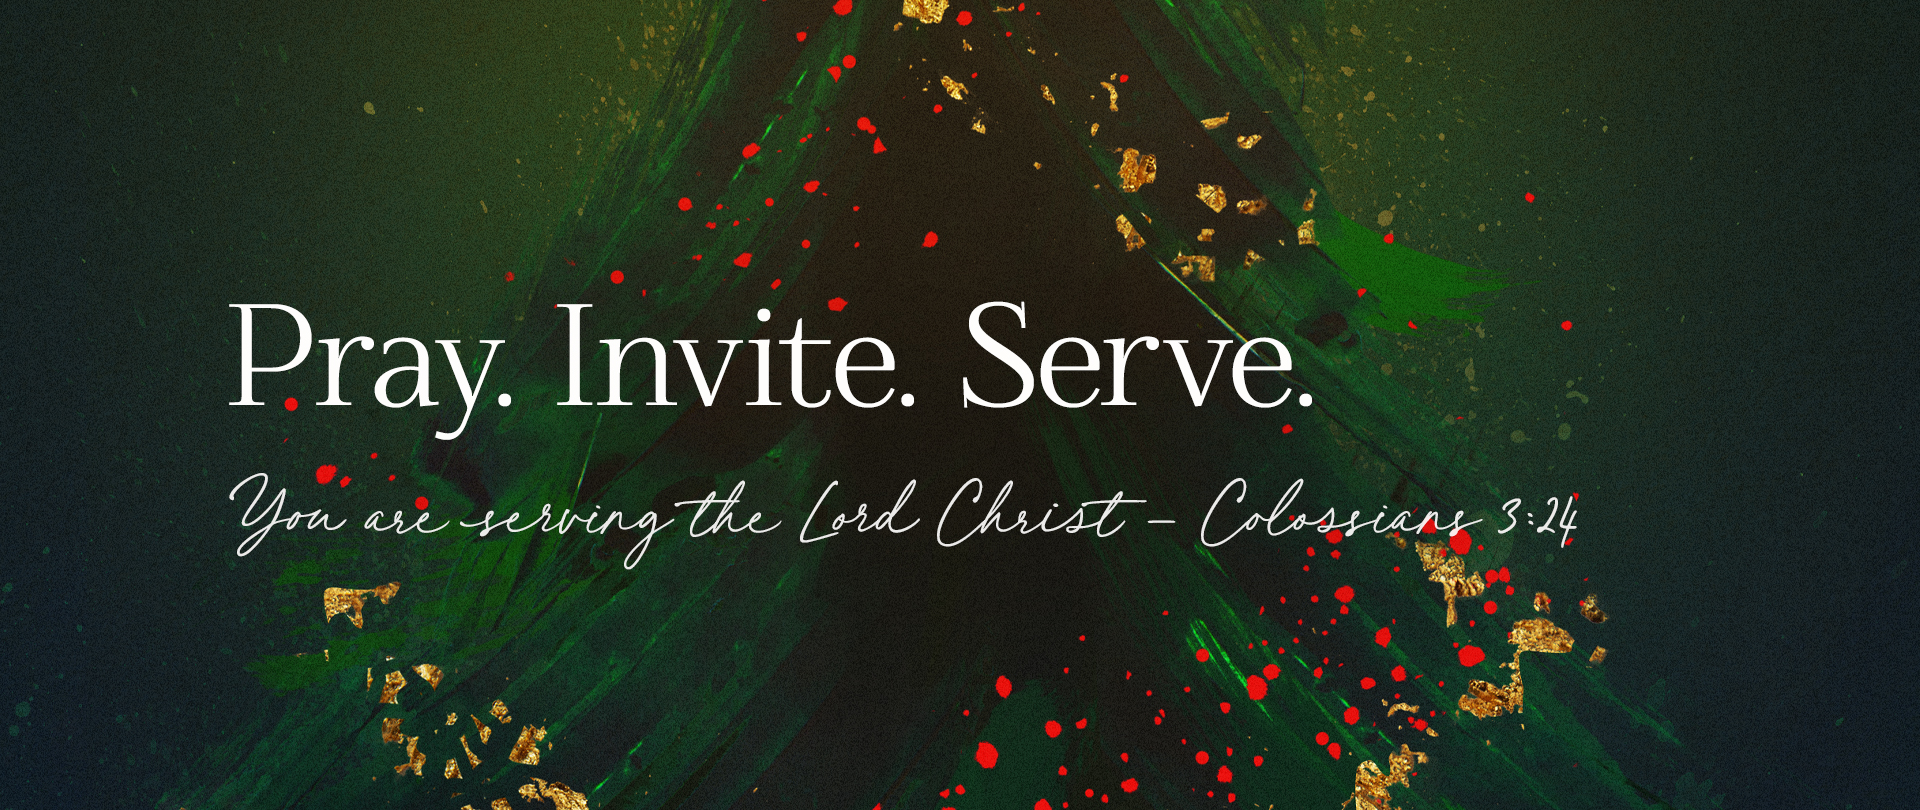 Pray. Invite. Serve.
Opportunities to make a difference!
